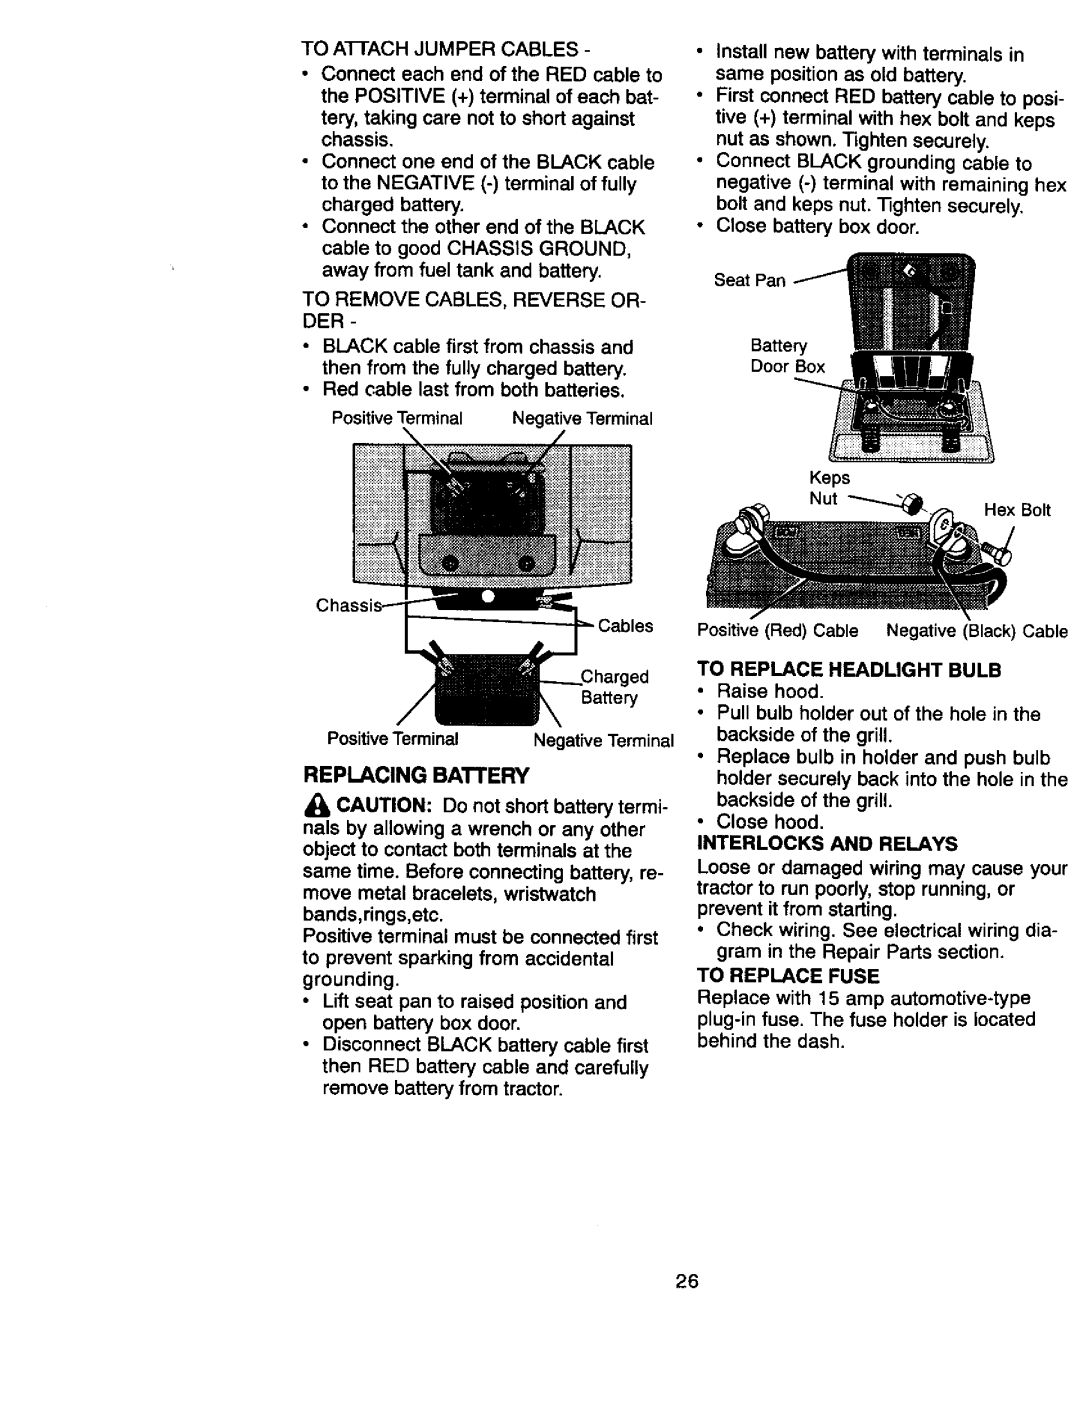 Craftsman 917.27066 owner manual Replacing Battery, To Replace Headlight Bulb, Interlocks and Relays, To Replace Fuse 